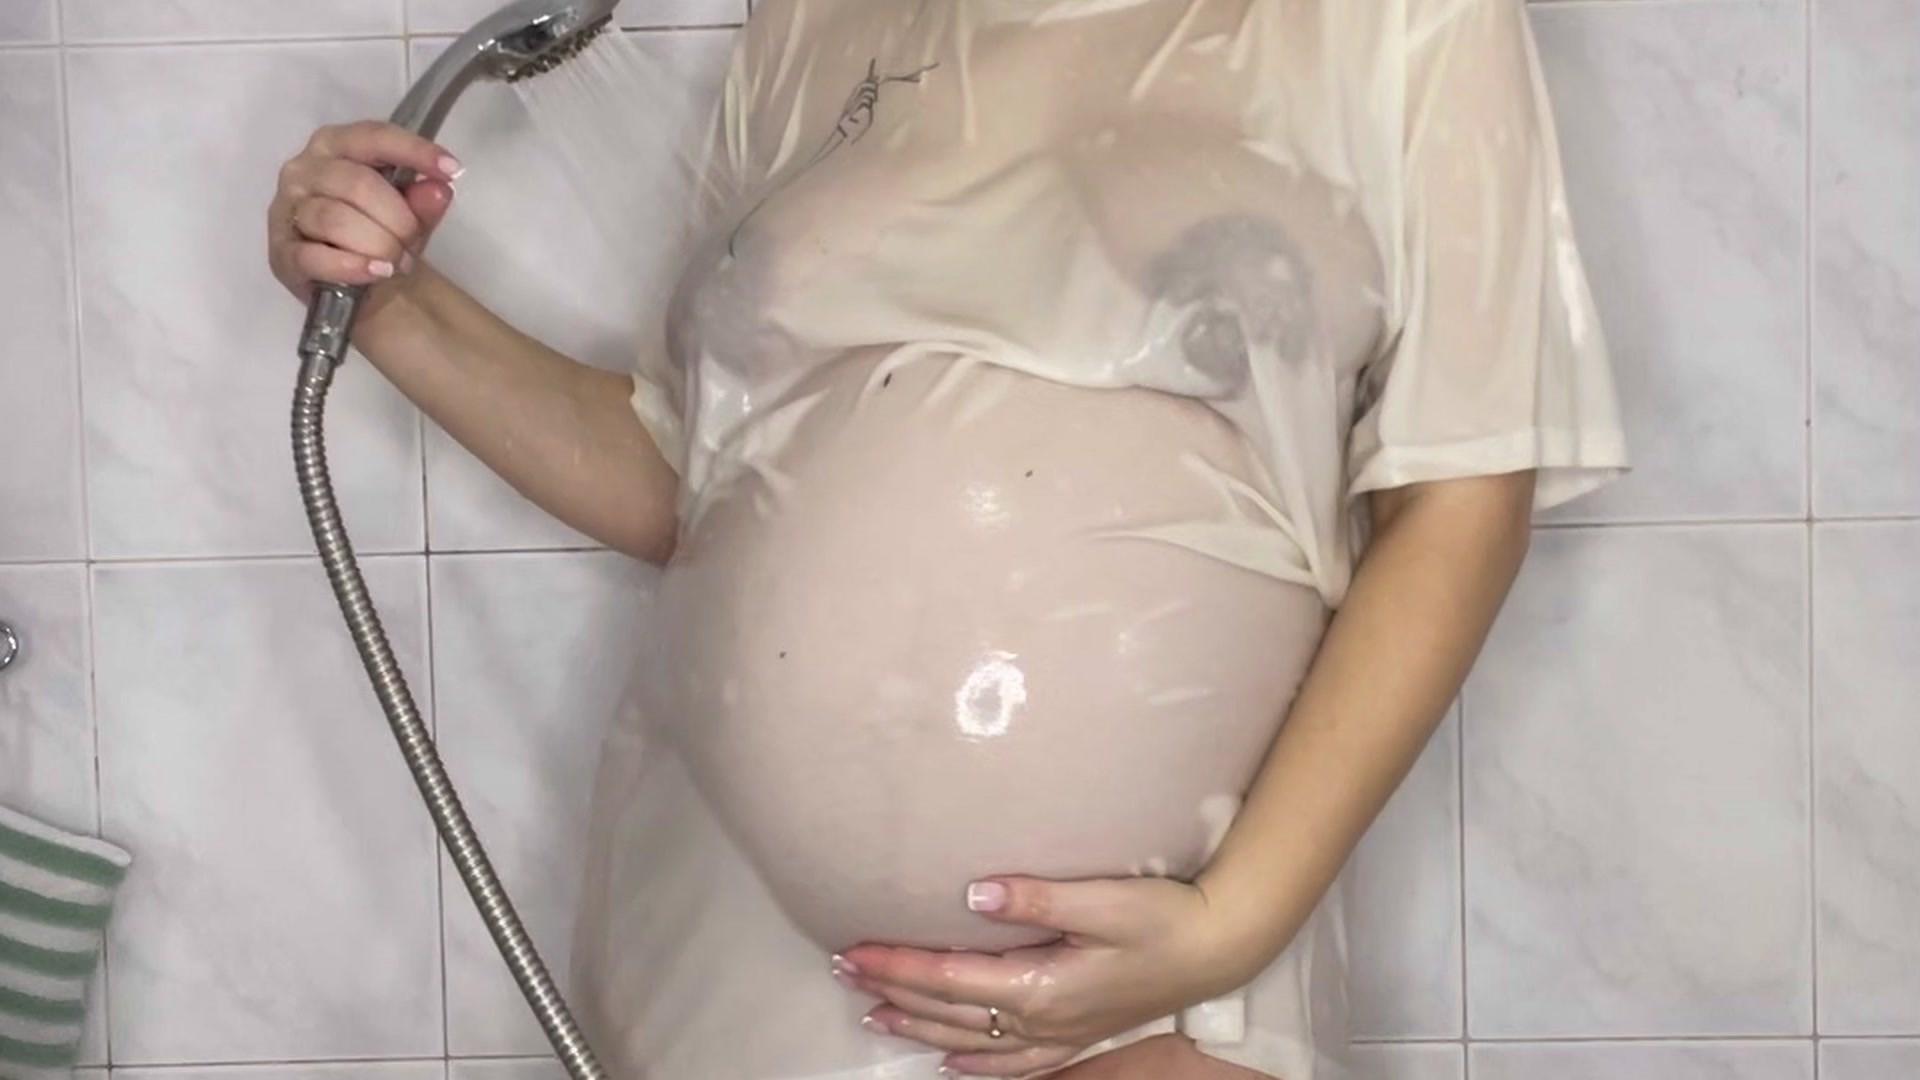 The pregnant woman arranged a show of wet t -shirts